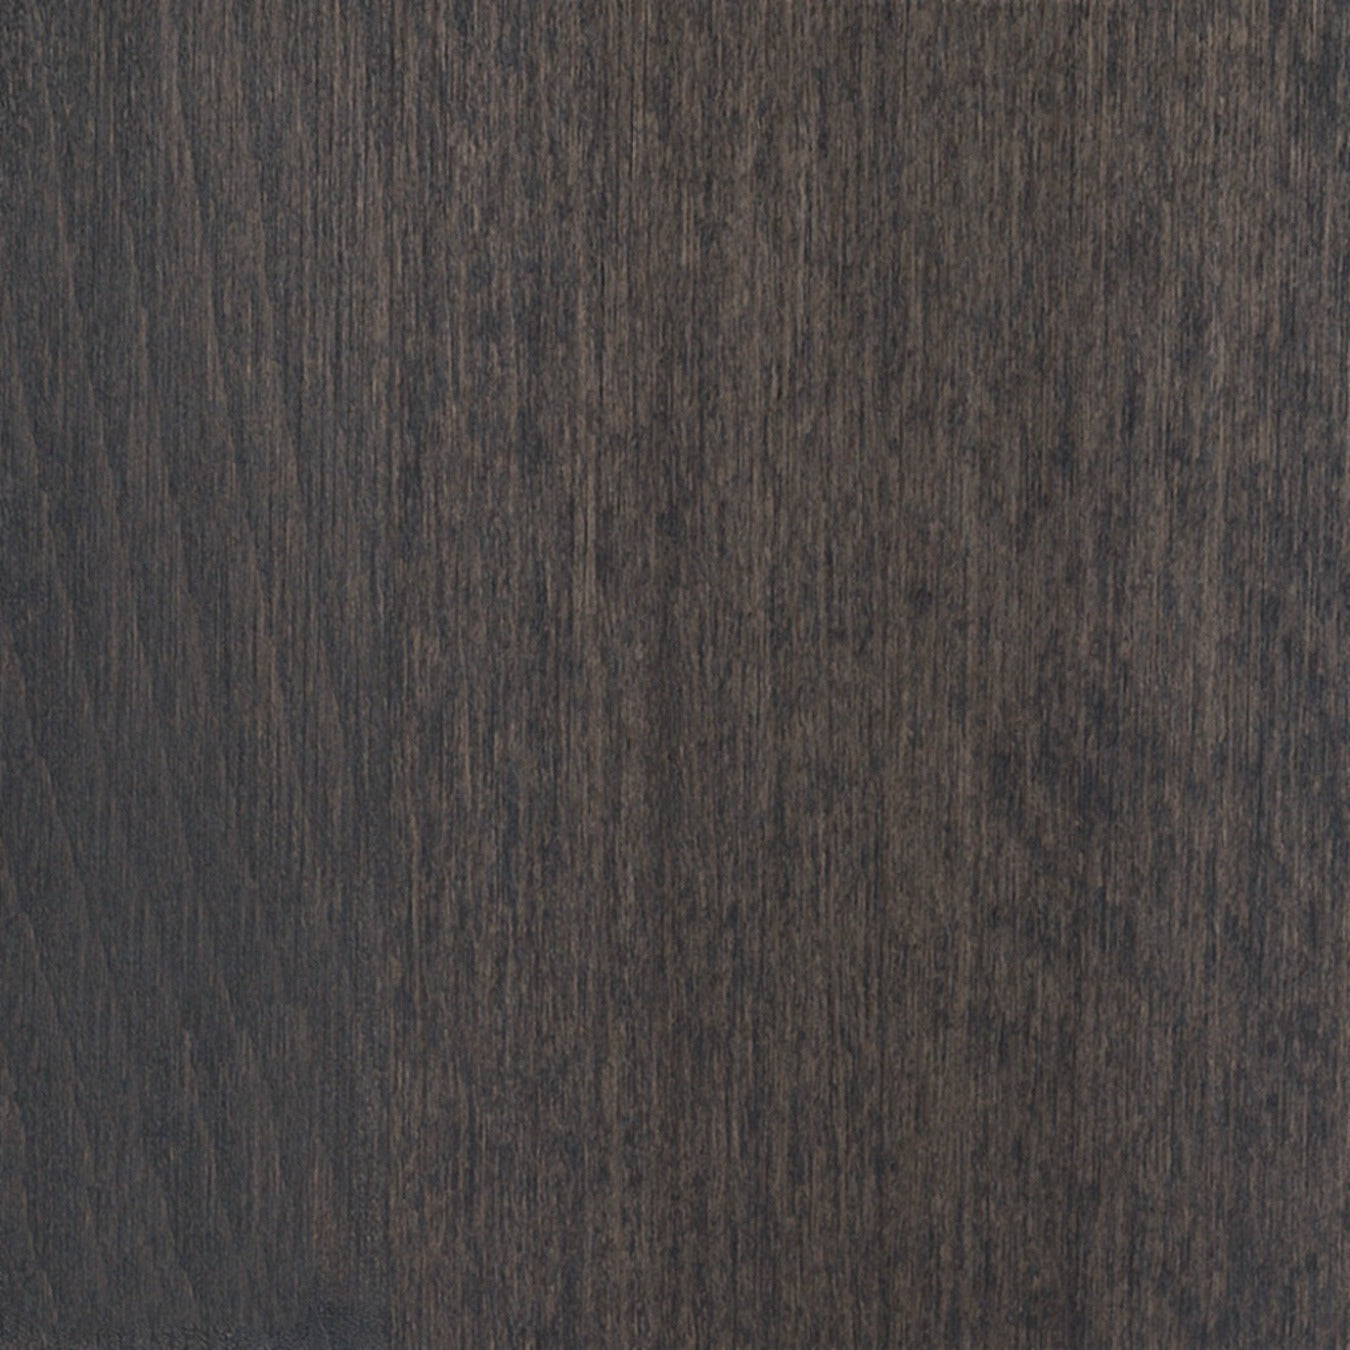 Sample of the Aqua Gray finish (zoomed in)